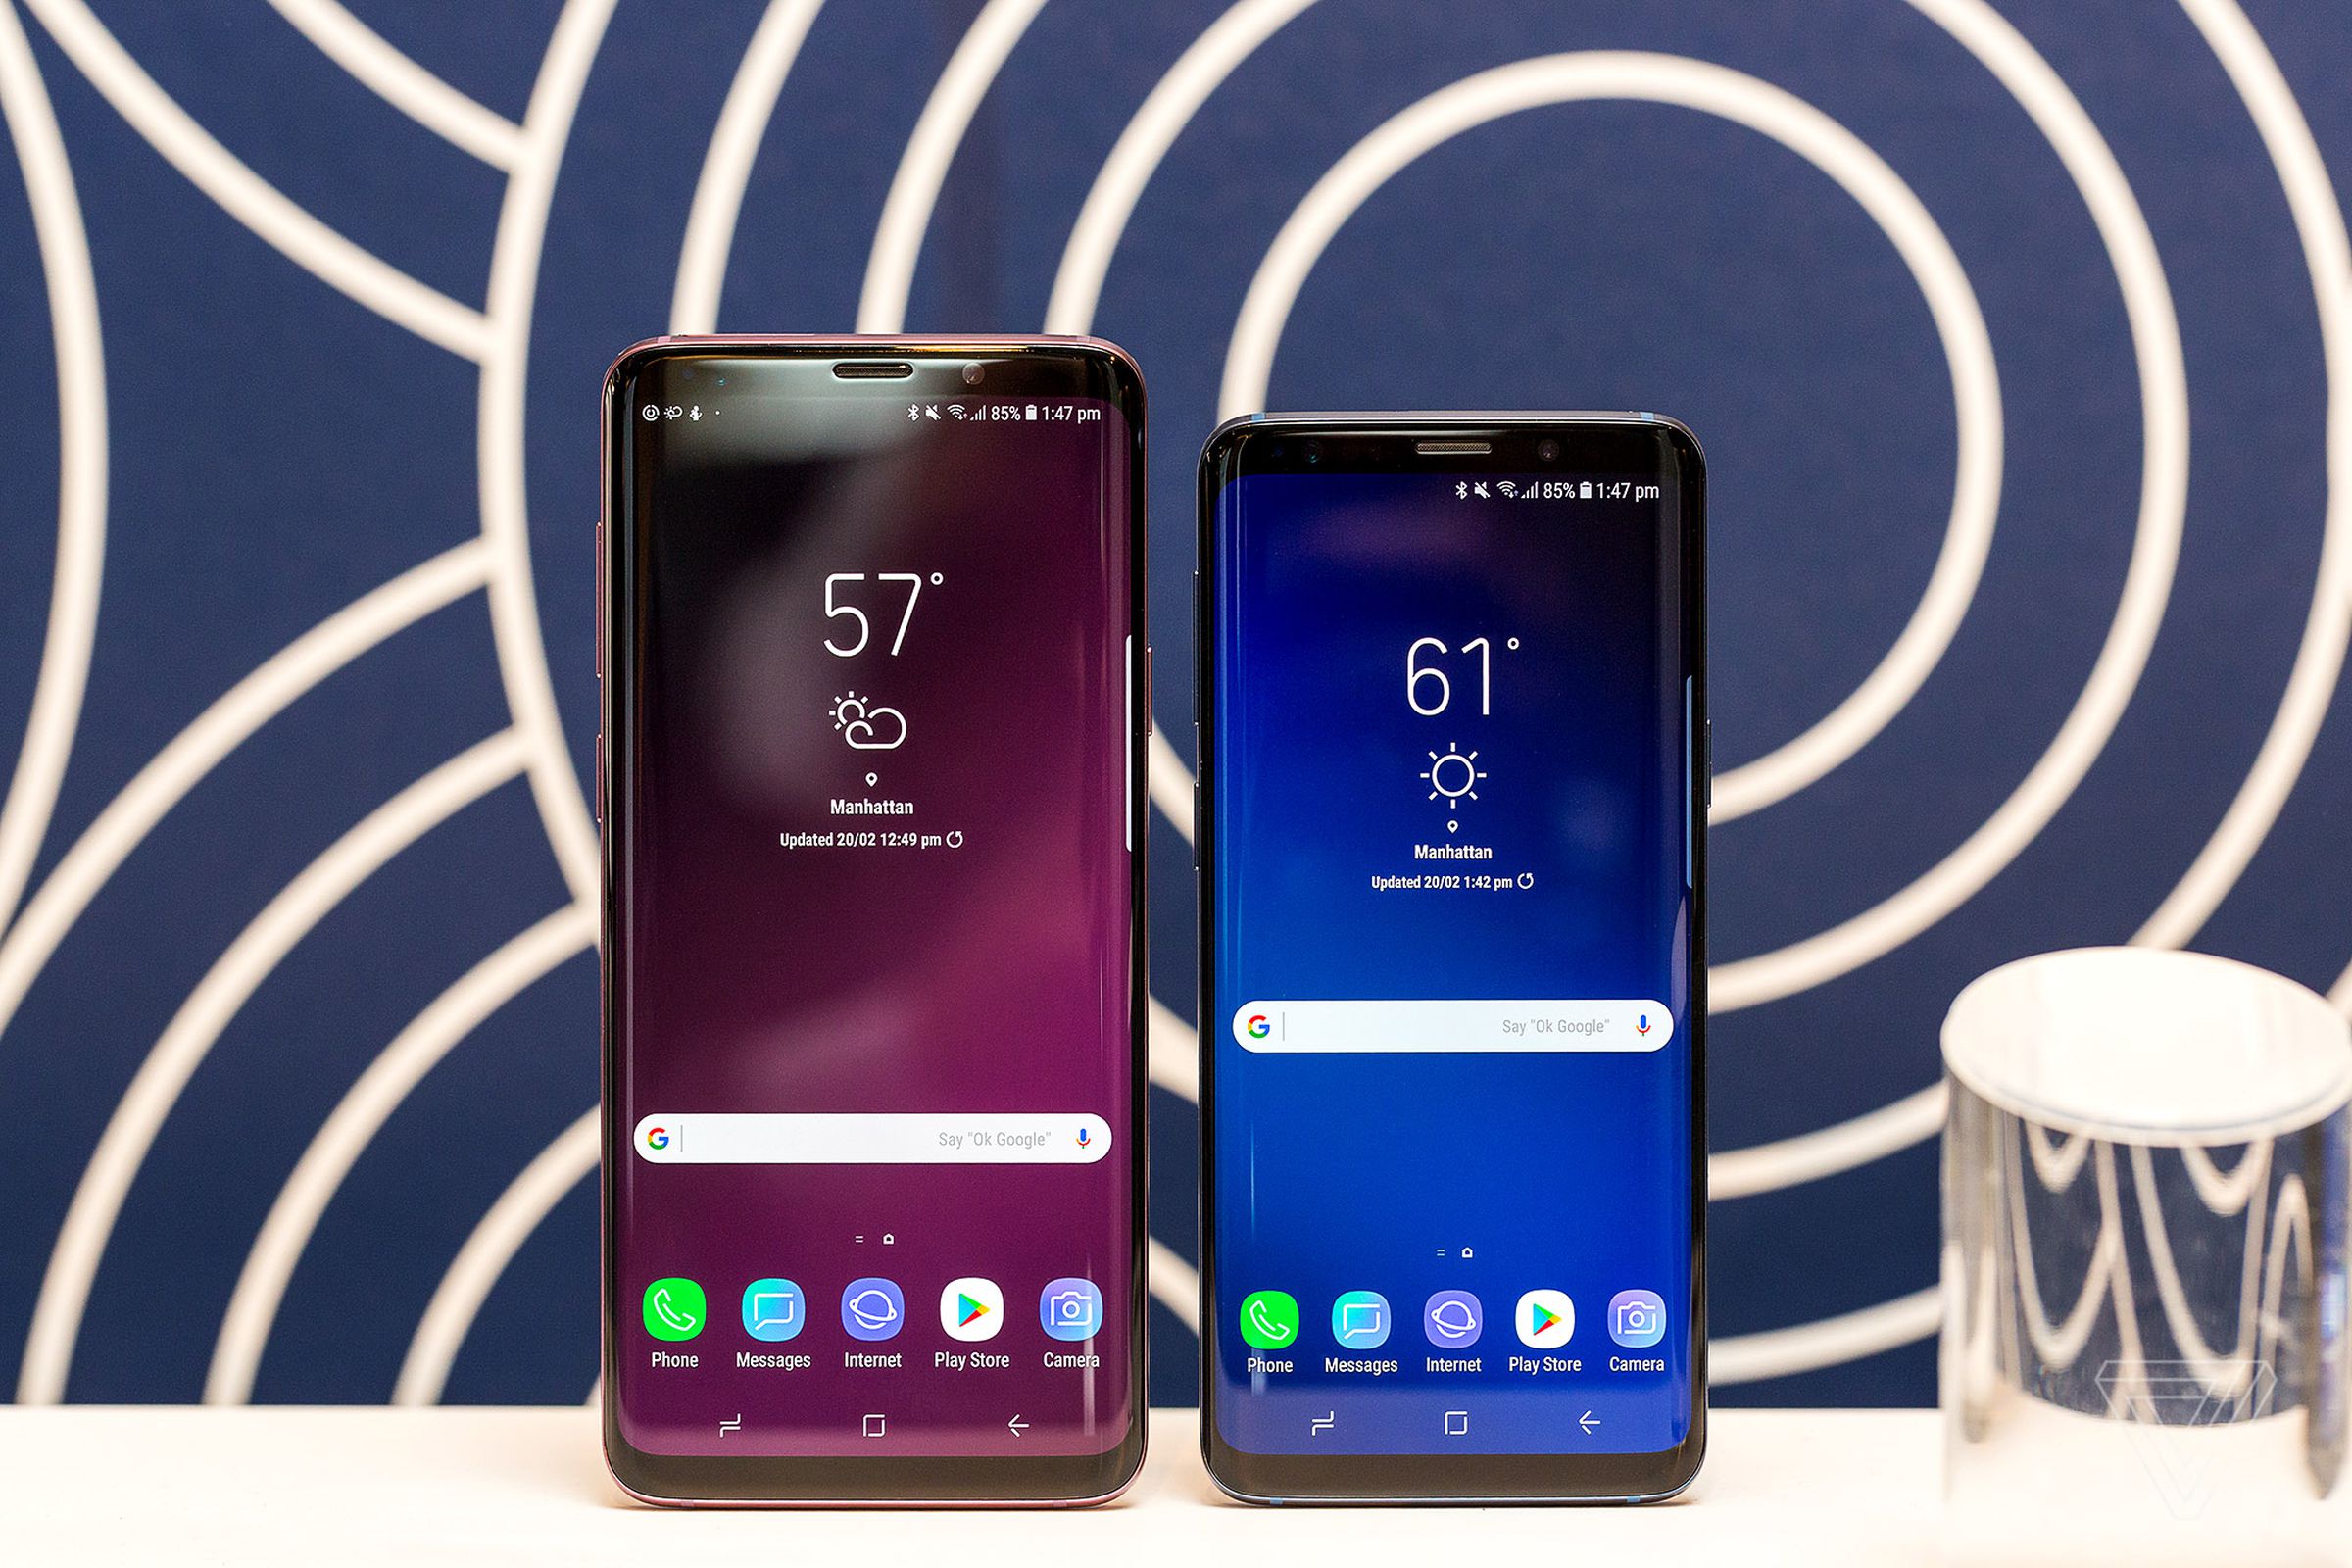 Samsung Galaxy S9 Plus and S9.